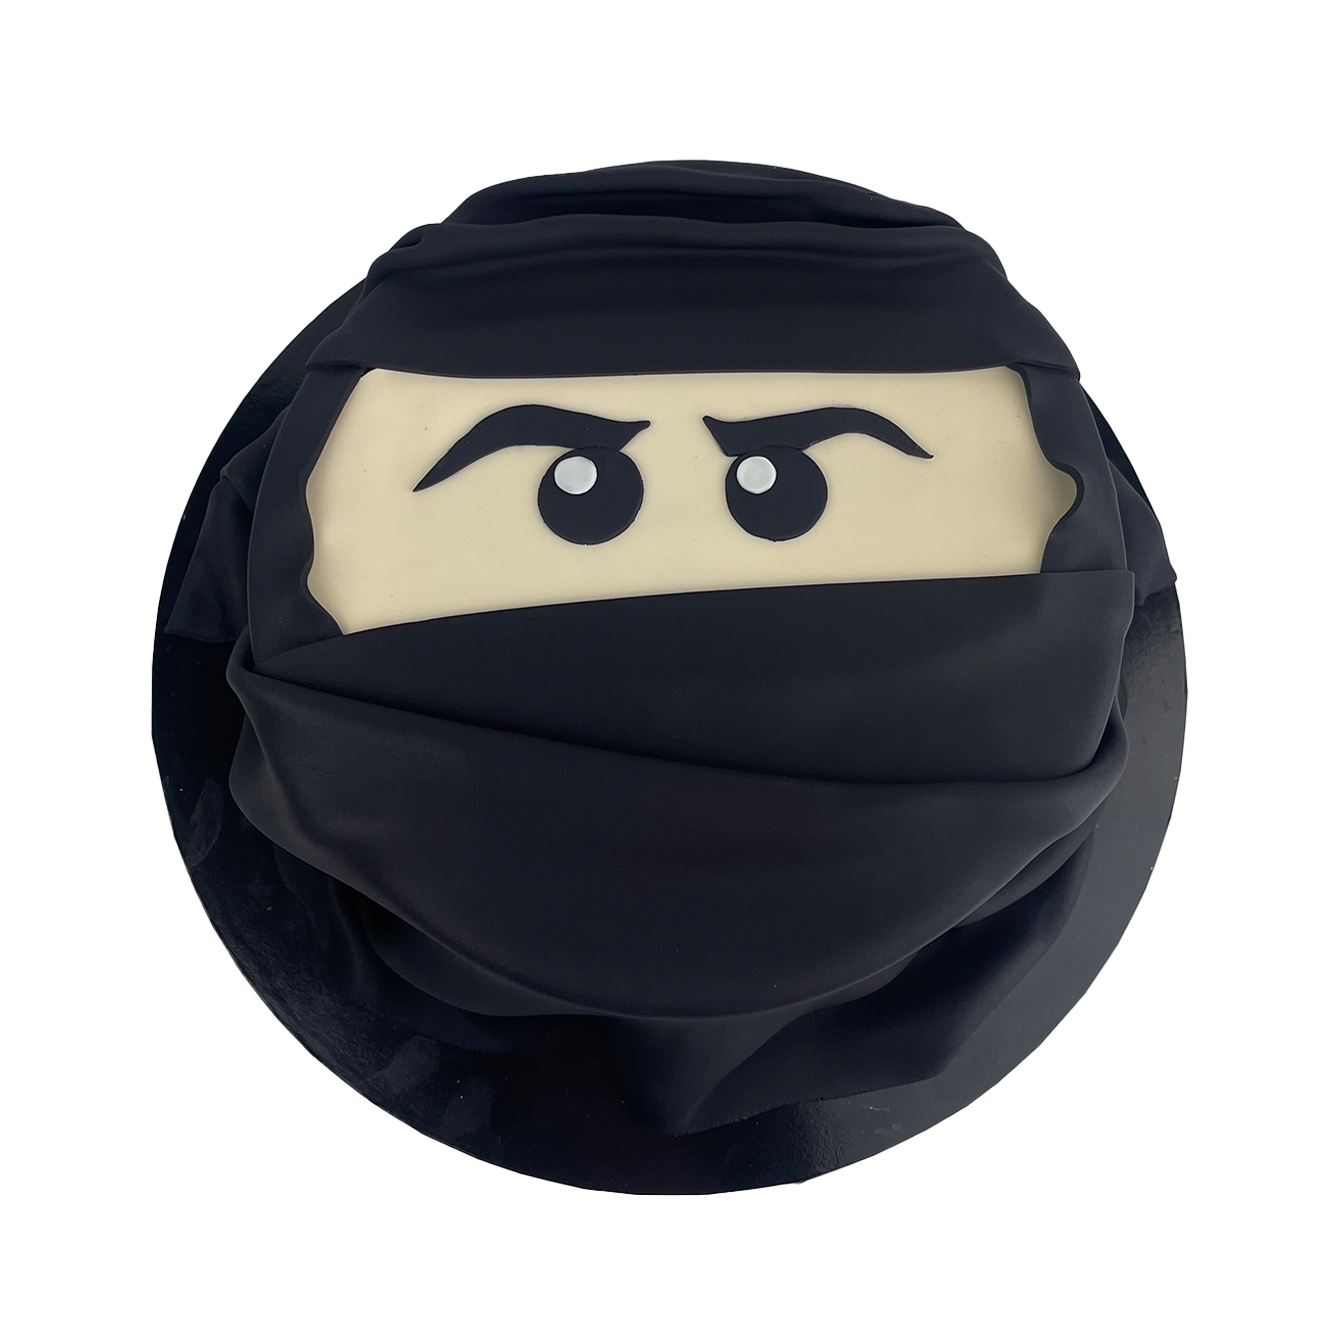 Ninja Adventure Face Cake - A thrilling Ninjago-inspired cake with cutout face design and black ninja mask, perfect for martial arts enthusiasts.